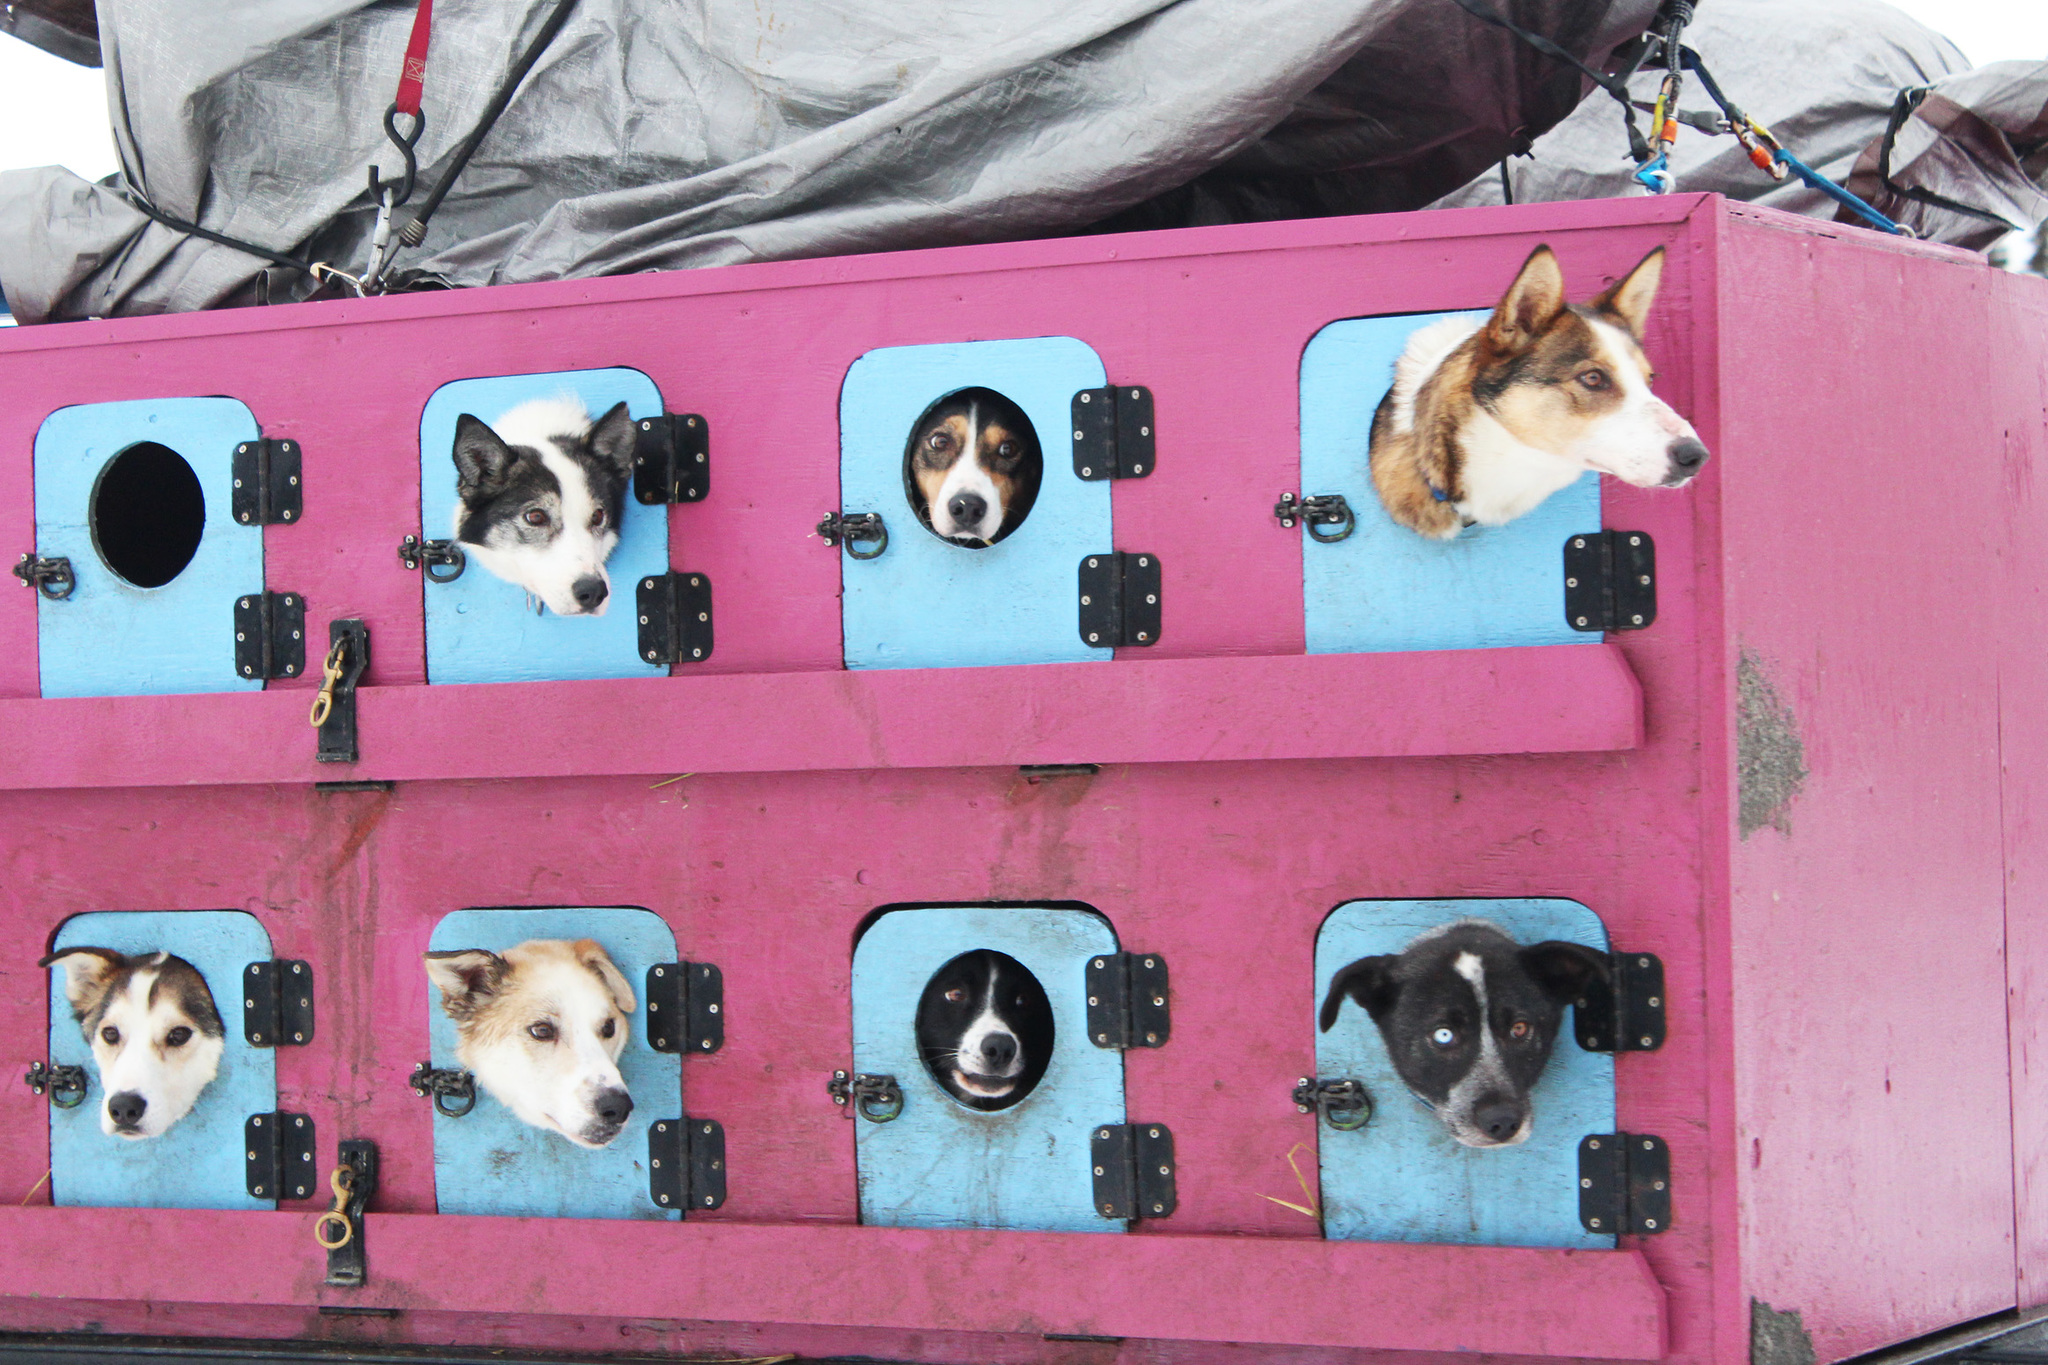 Sled dogs poke their heads out of holes in their truck as they are driven into the Soldotna Regional Sports Complex for veterinary checks Friday, Jan. 27, 2017 in Soldotna, Alaska. Mushers brought their teams to be checked out one last time before they take off in the Tustumena 200 Sled Dog Race on Saturday. The race is celebrating its 30th year after being canceled the last few years due to lack of snow. (Megan Pacer/Peninsula Clarion)